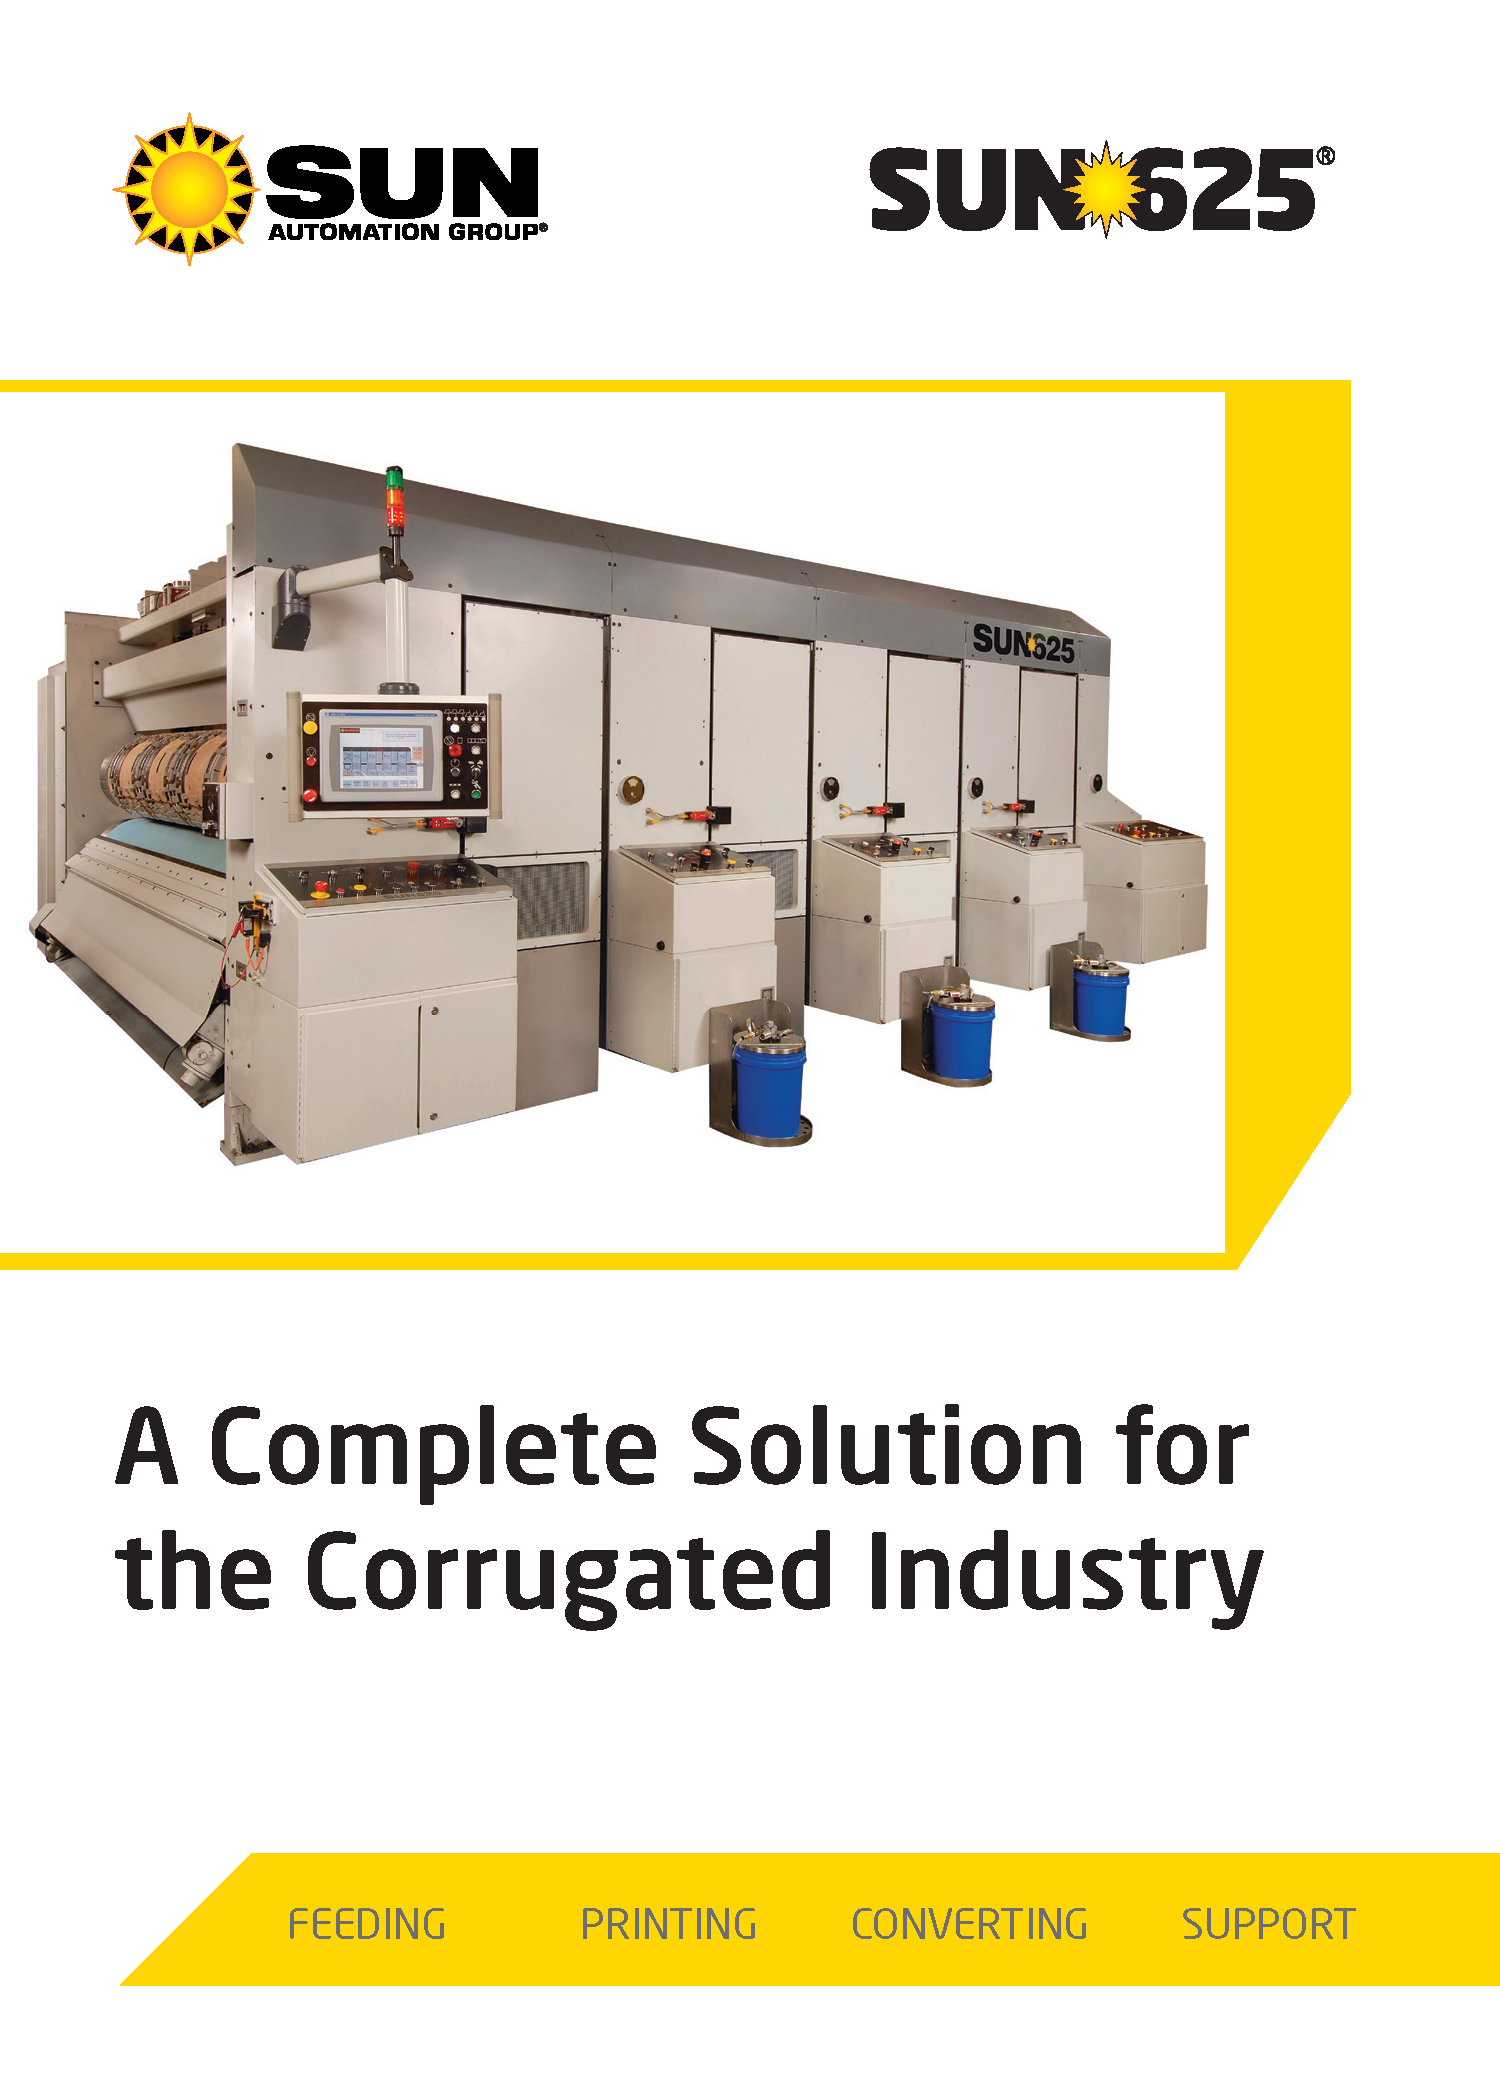 Learn more about the SUN625 RDC in the Sun Automation Group's brochure.